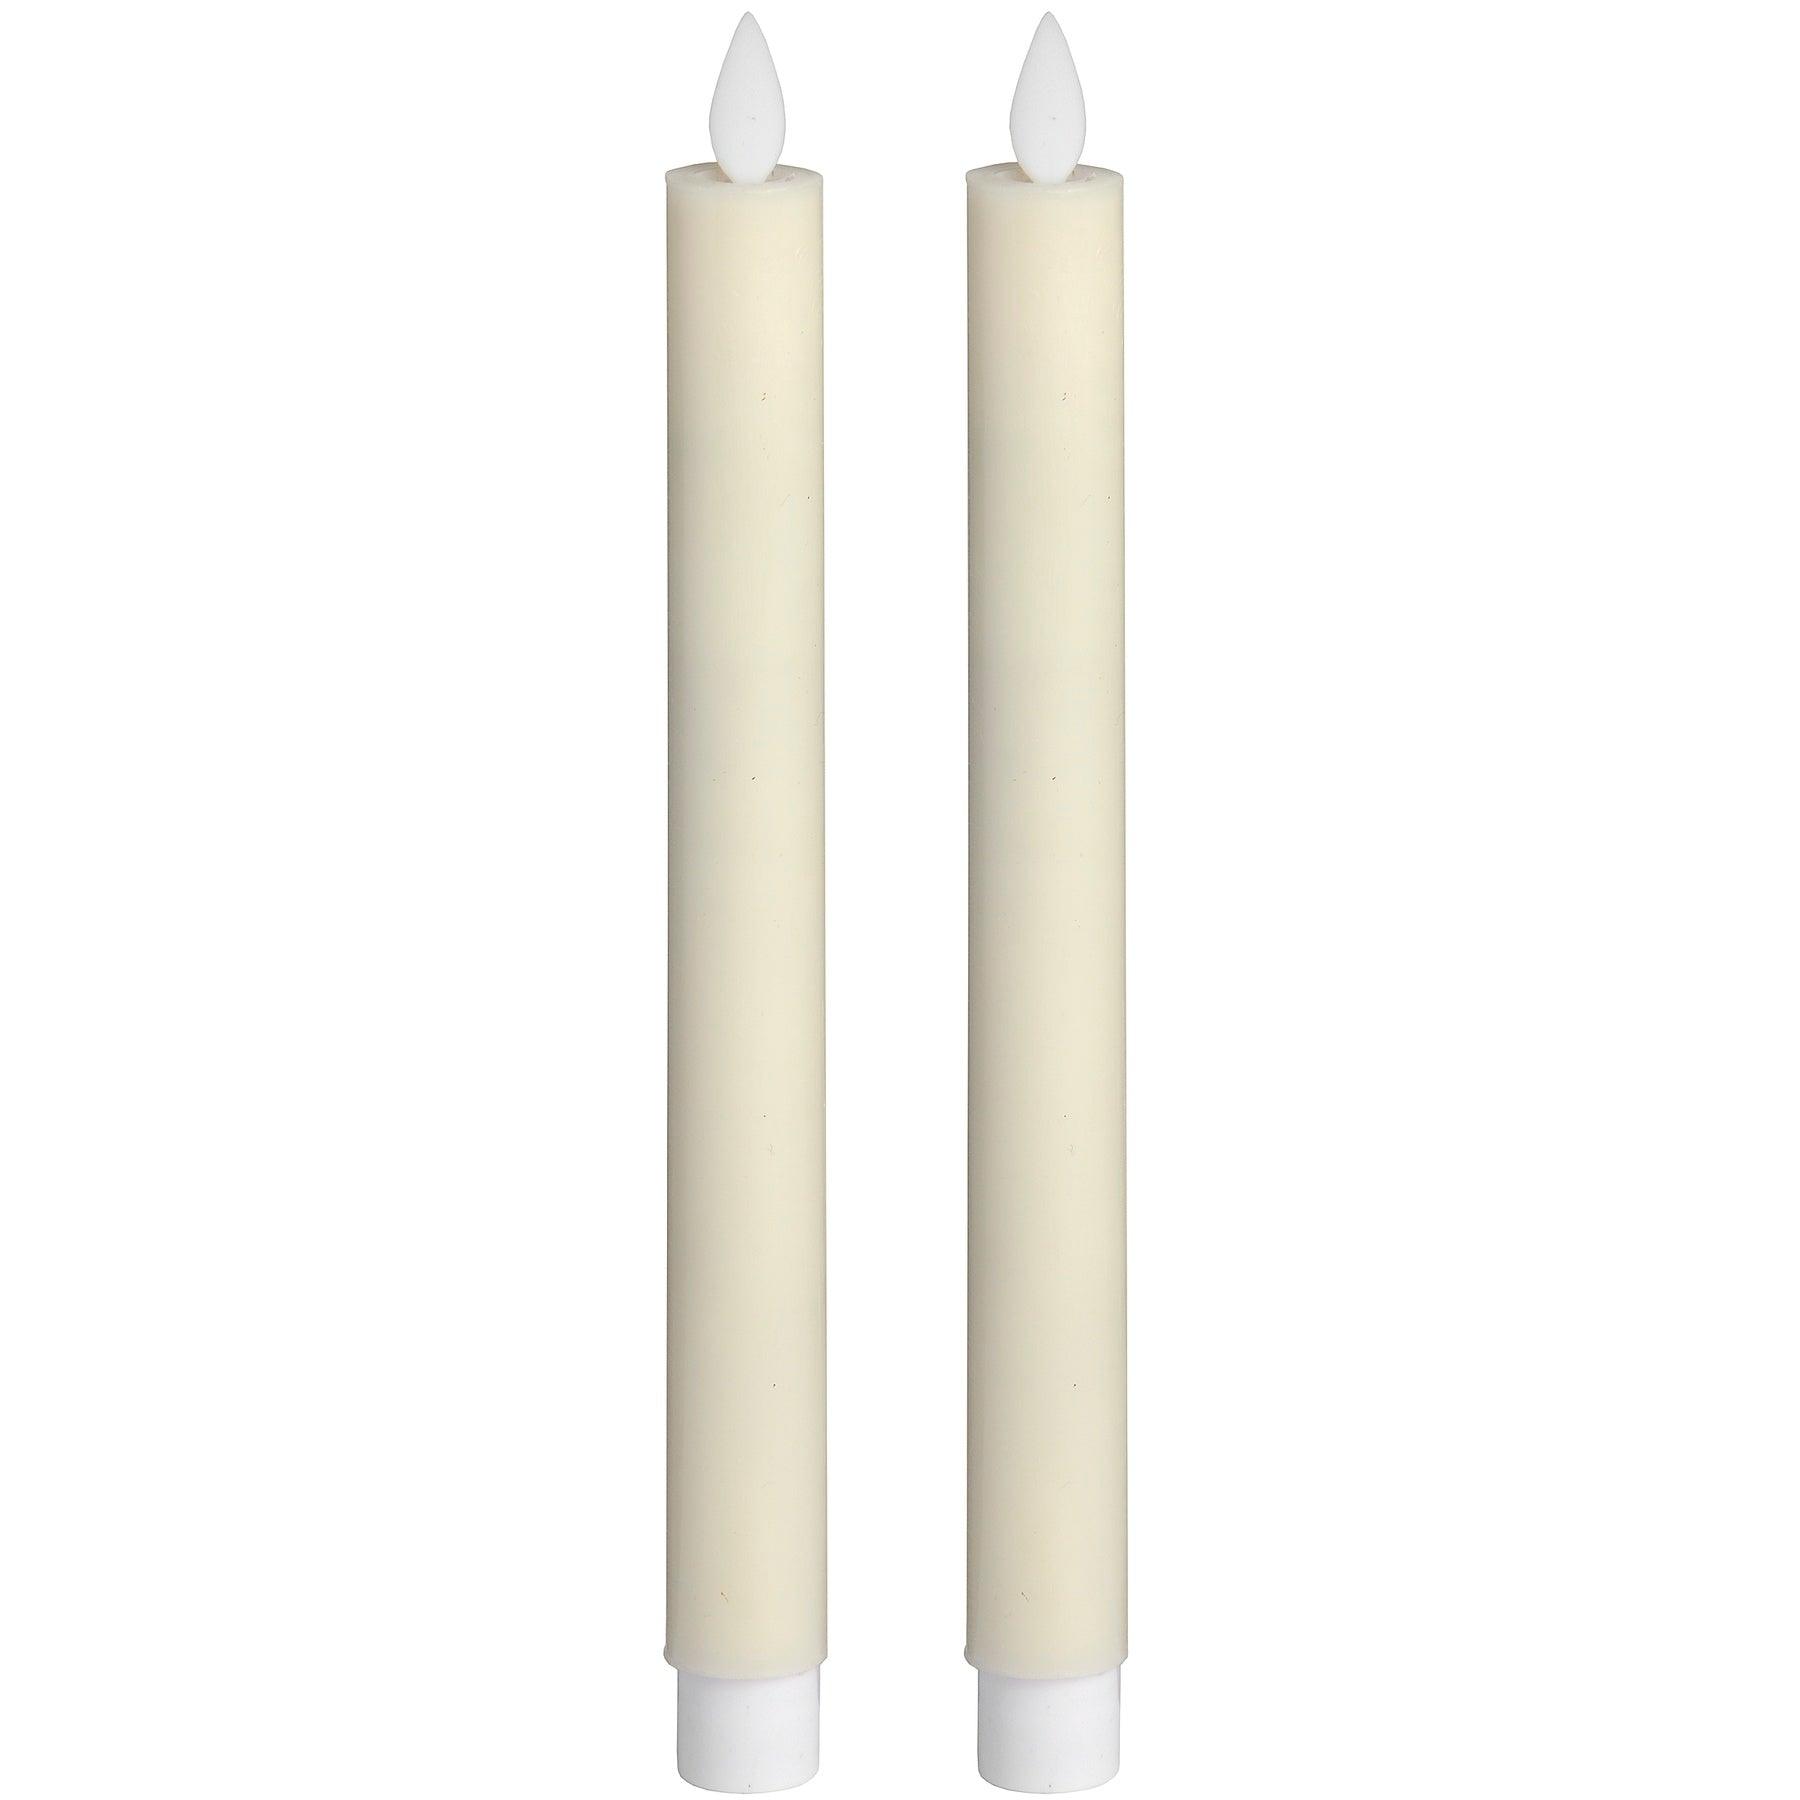 View Pair Of Cream Luxe Flickering Flame LED Wax Dinner Candles information